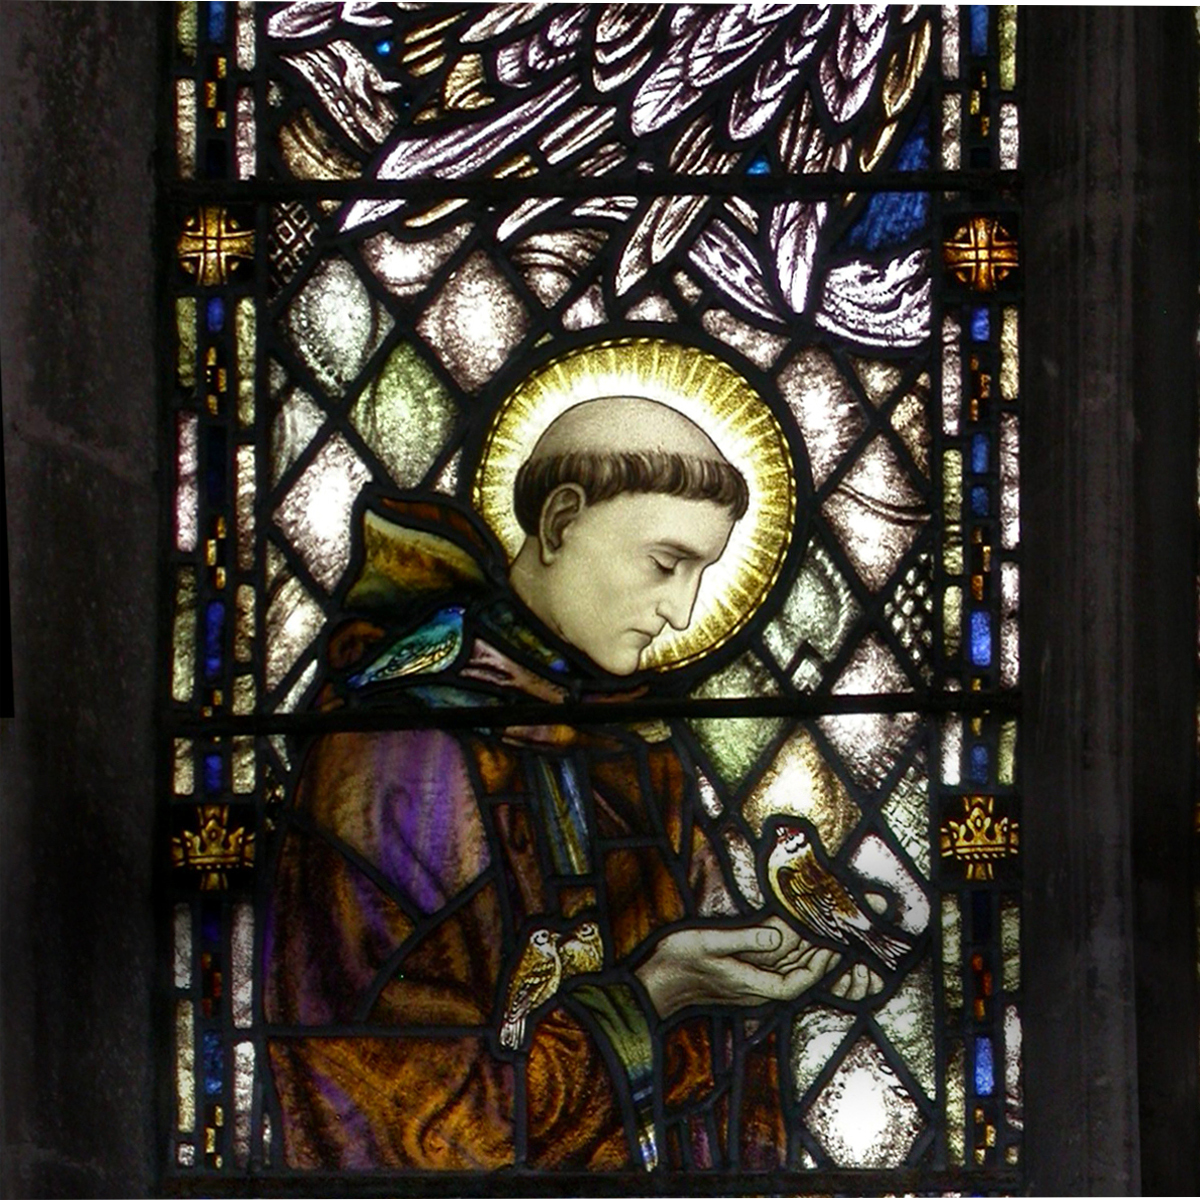 An introduction to the stained glass windows in Cradley church